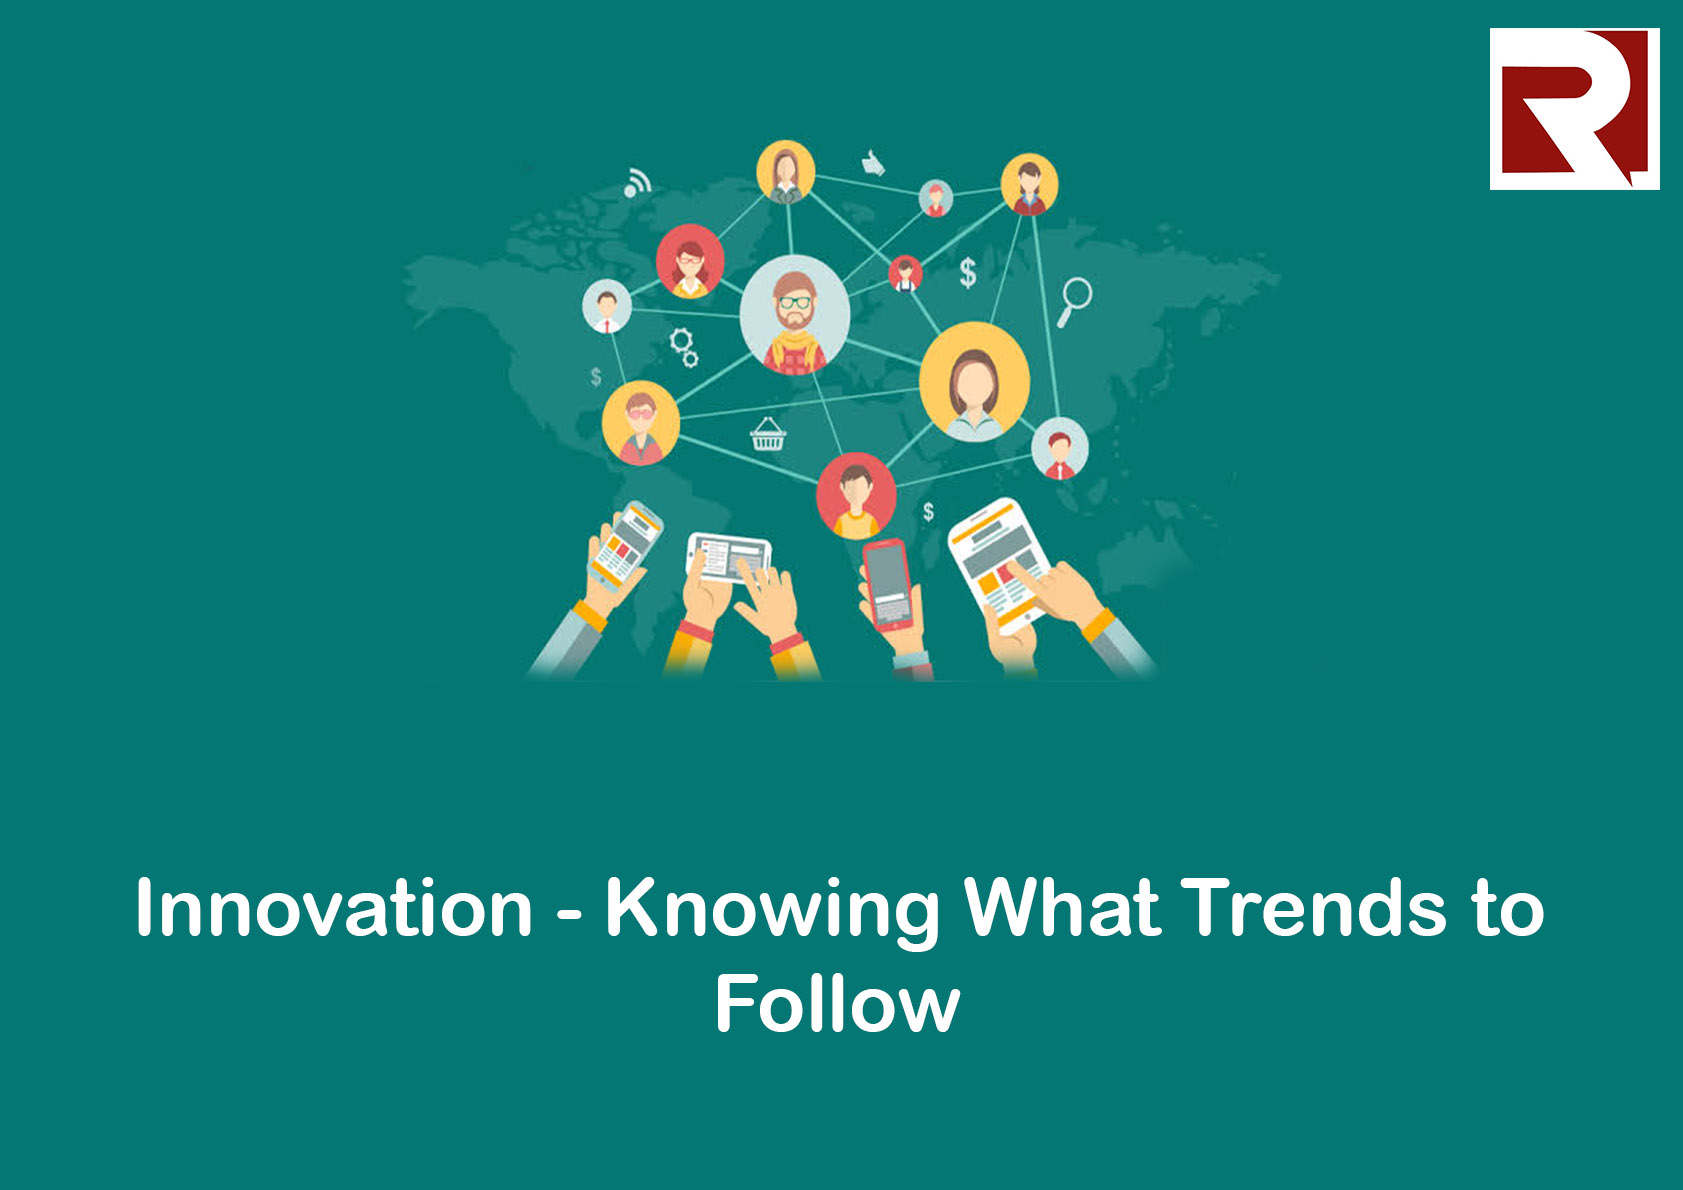 Innovation - Knowing What Trends To Follow